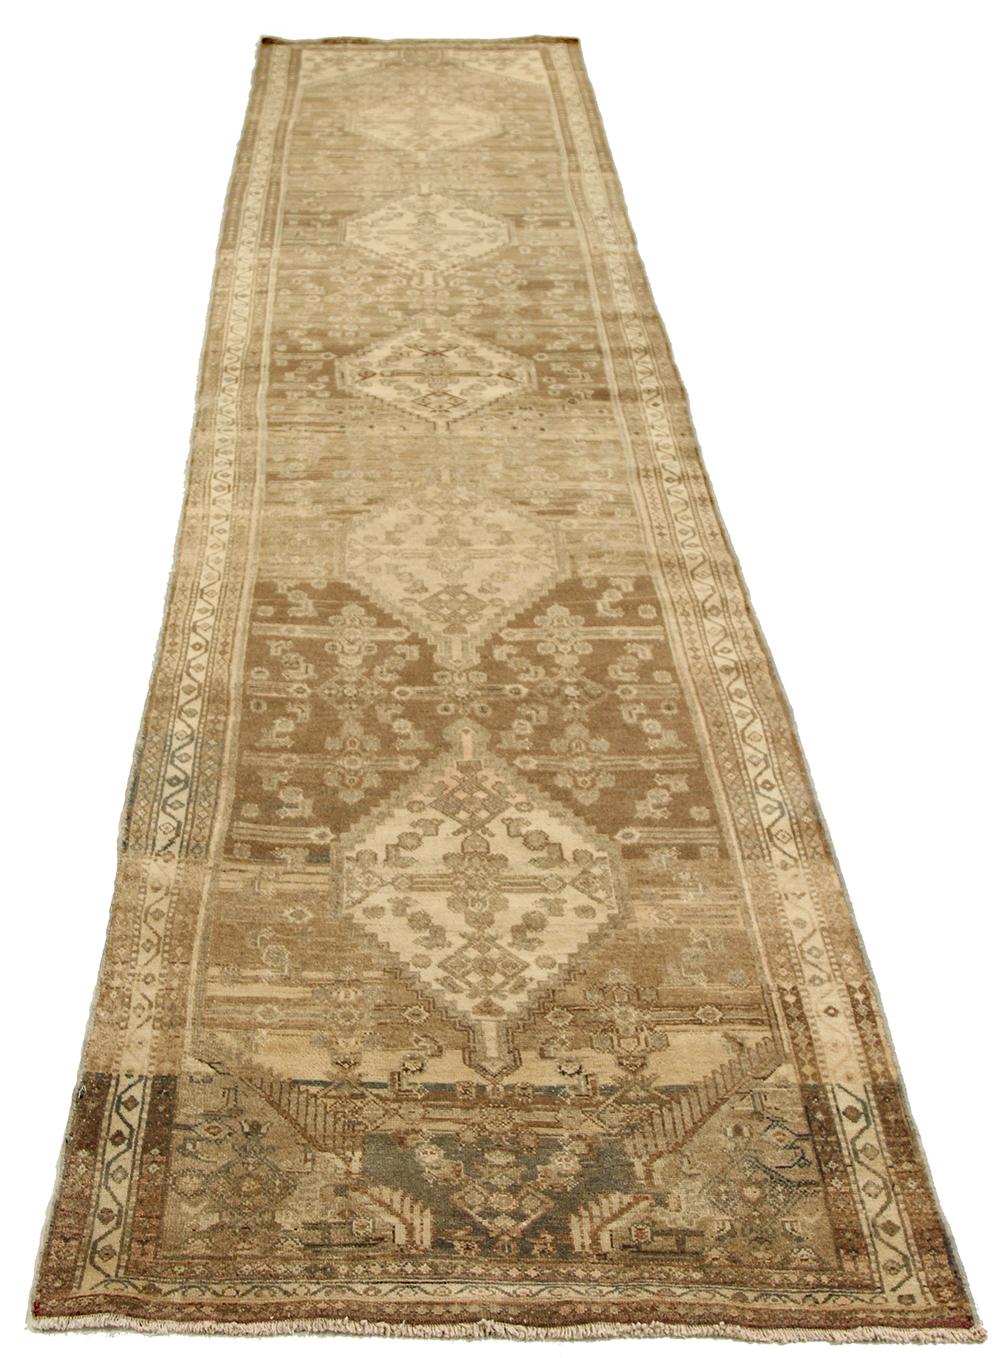 Antique Persian runner rug handwoven from the finest sheep’s wool and colored with all-natural vegetable dyes that are safe for humans and pets. It’s a traditional Malayer design featuring brown and beige botanical patterns over an ivory field. It’s